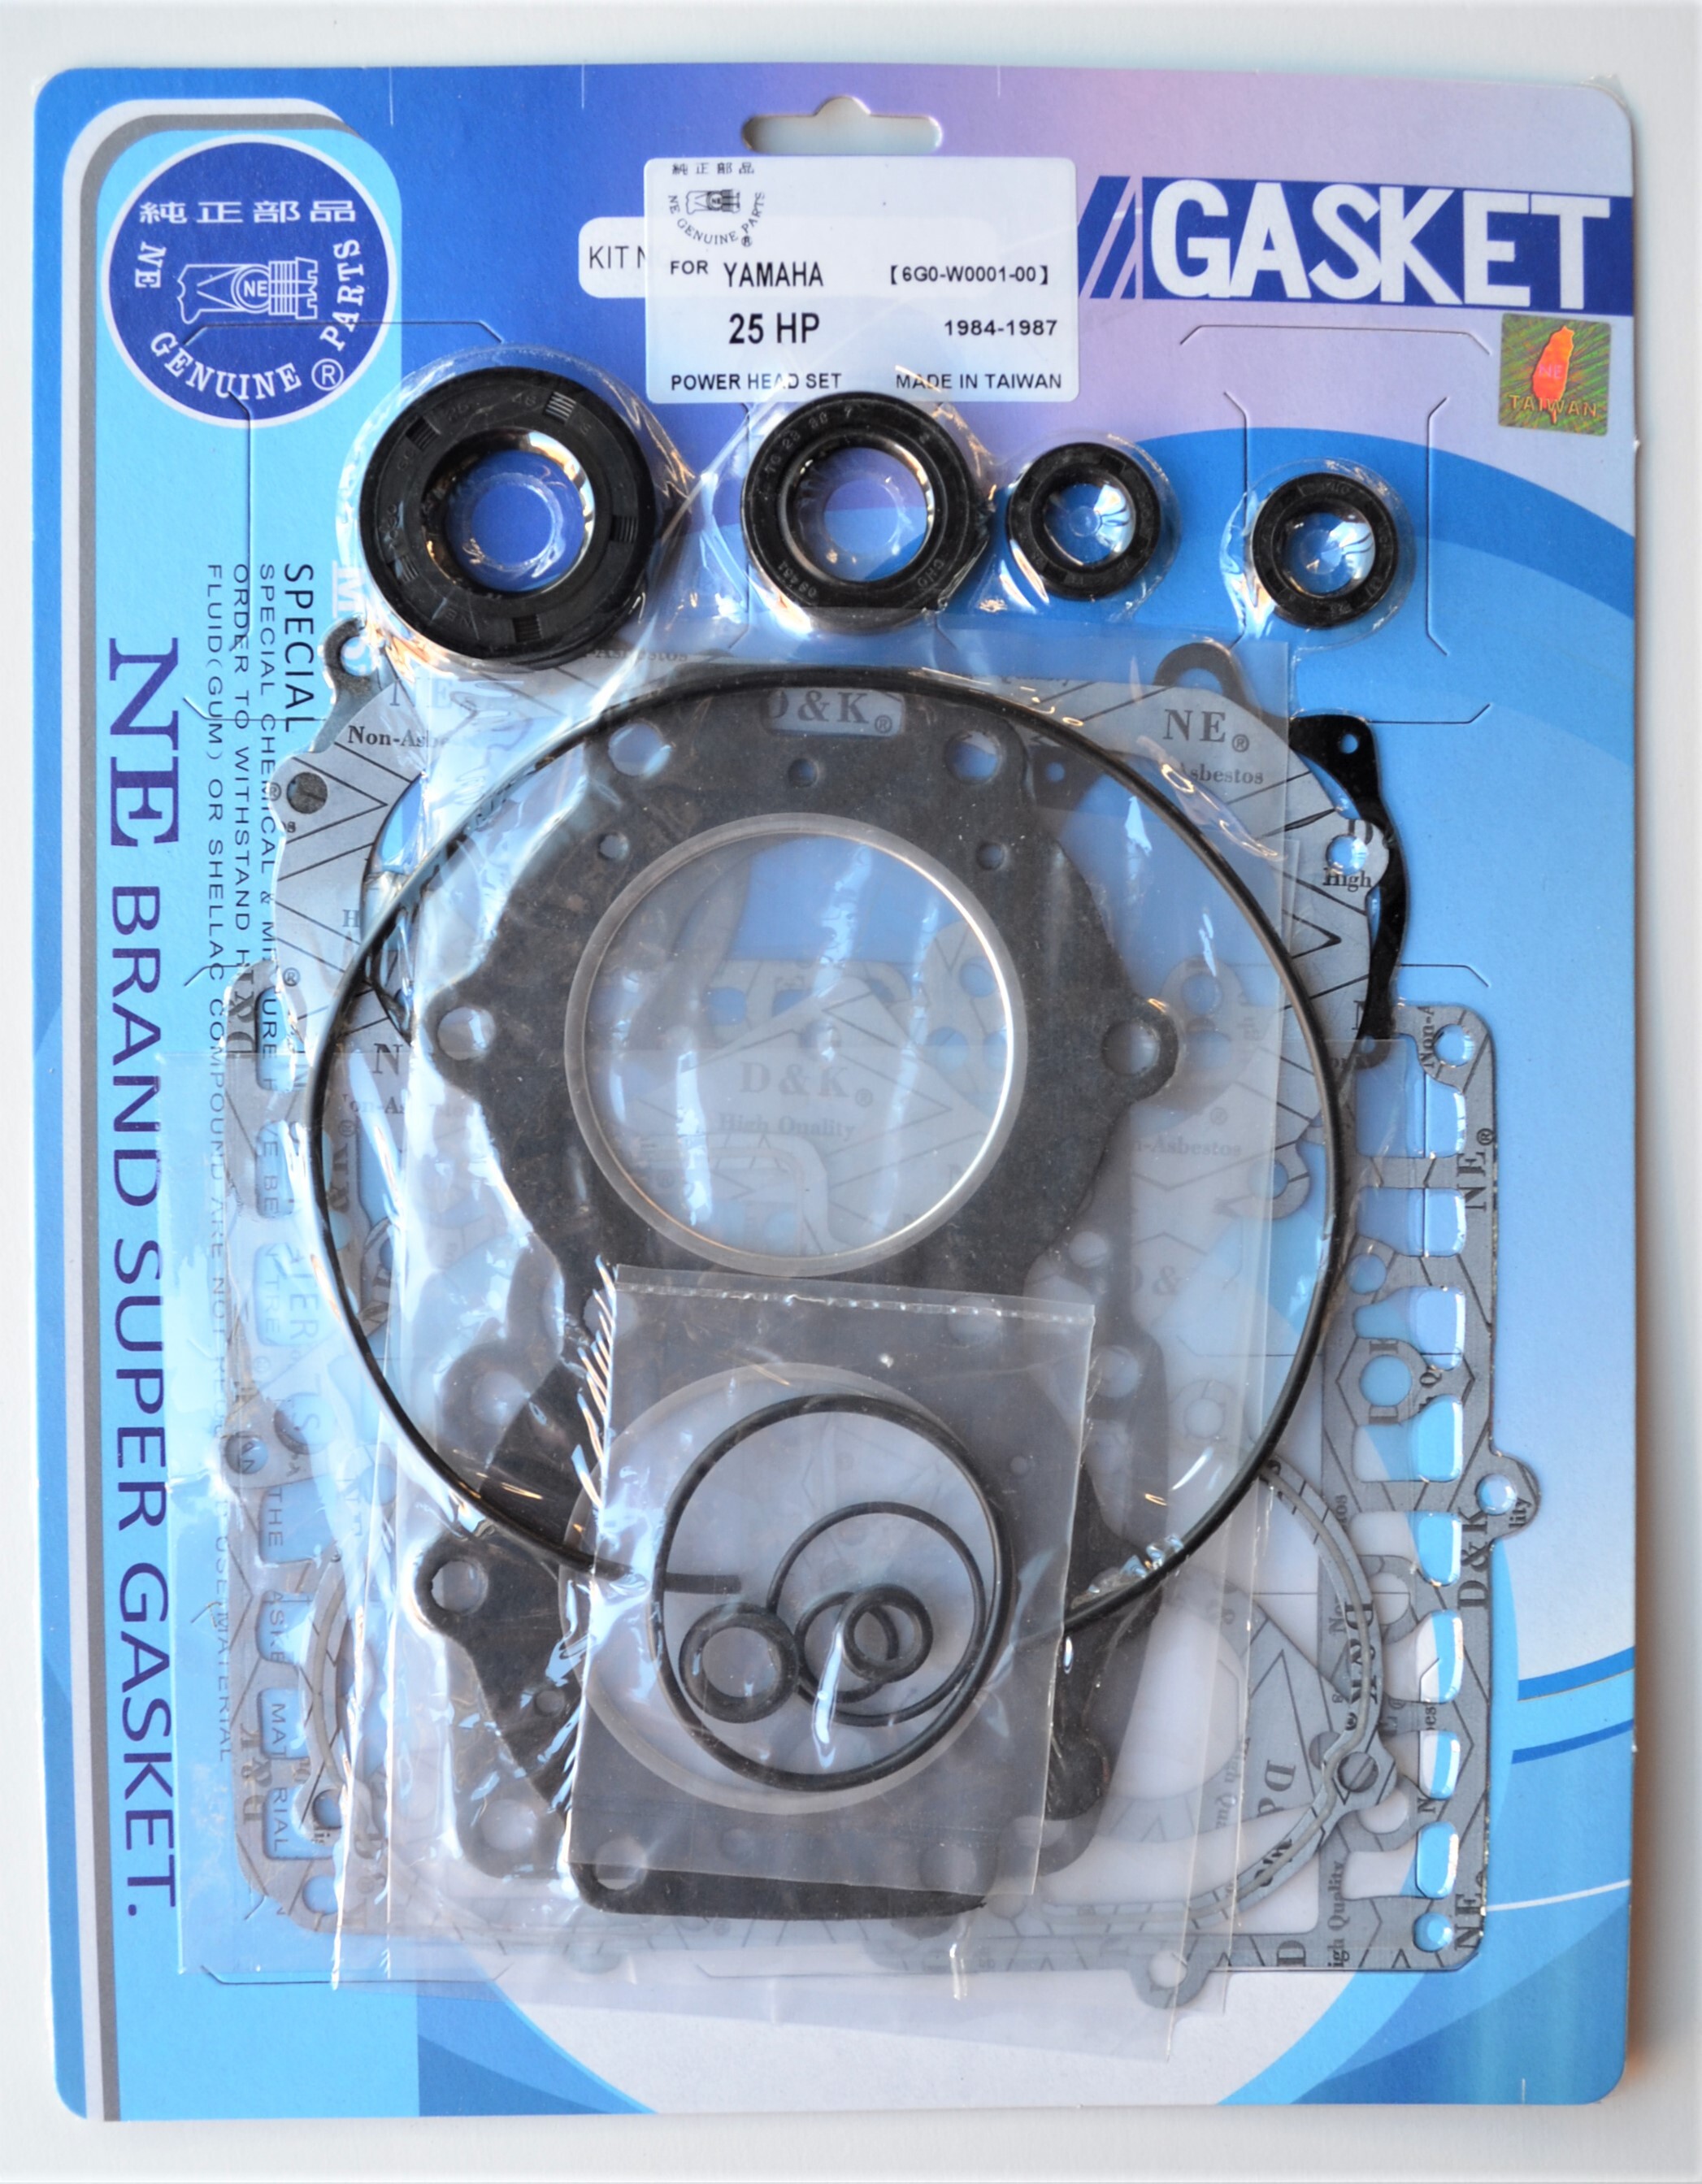 POWER HEAD GASKET KIT FOR 25HP YAMAHA OUTBOARD MOTOR # 6G0-W0001-00